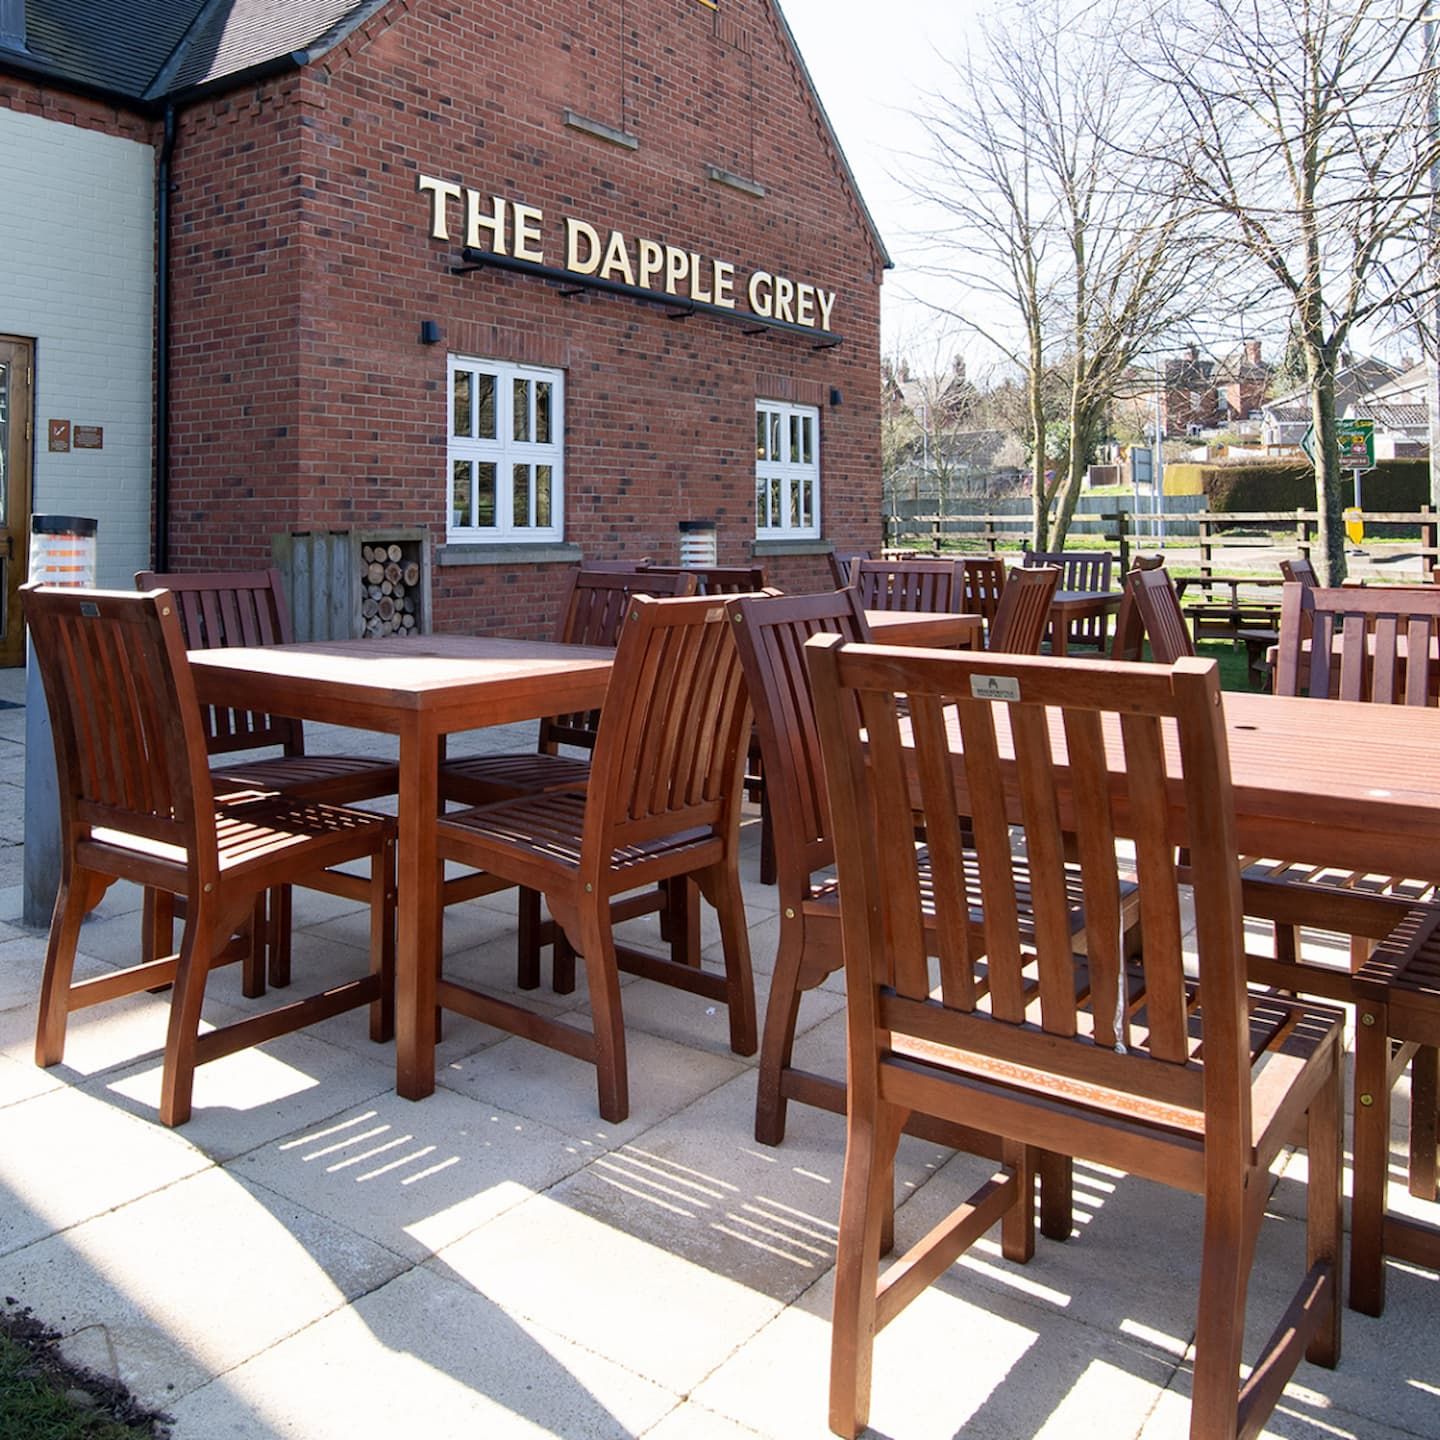 Good food & great times at The Dapple Grey Uttoxeter